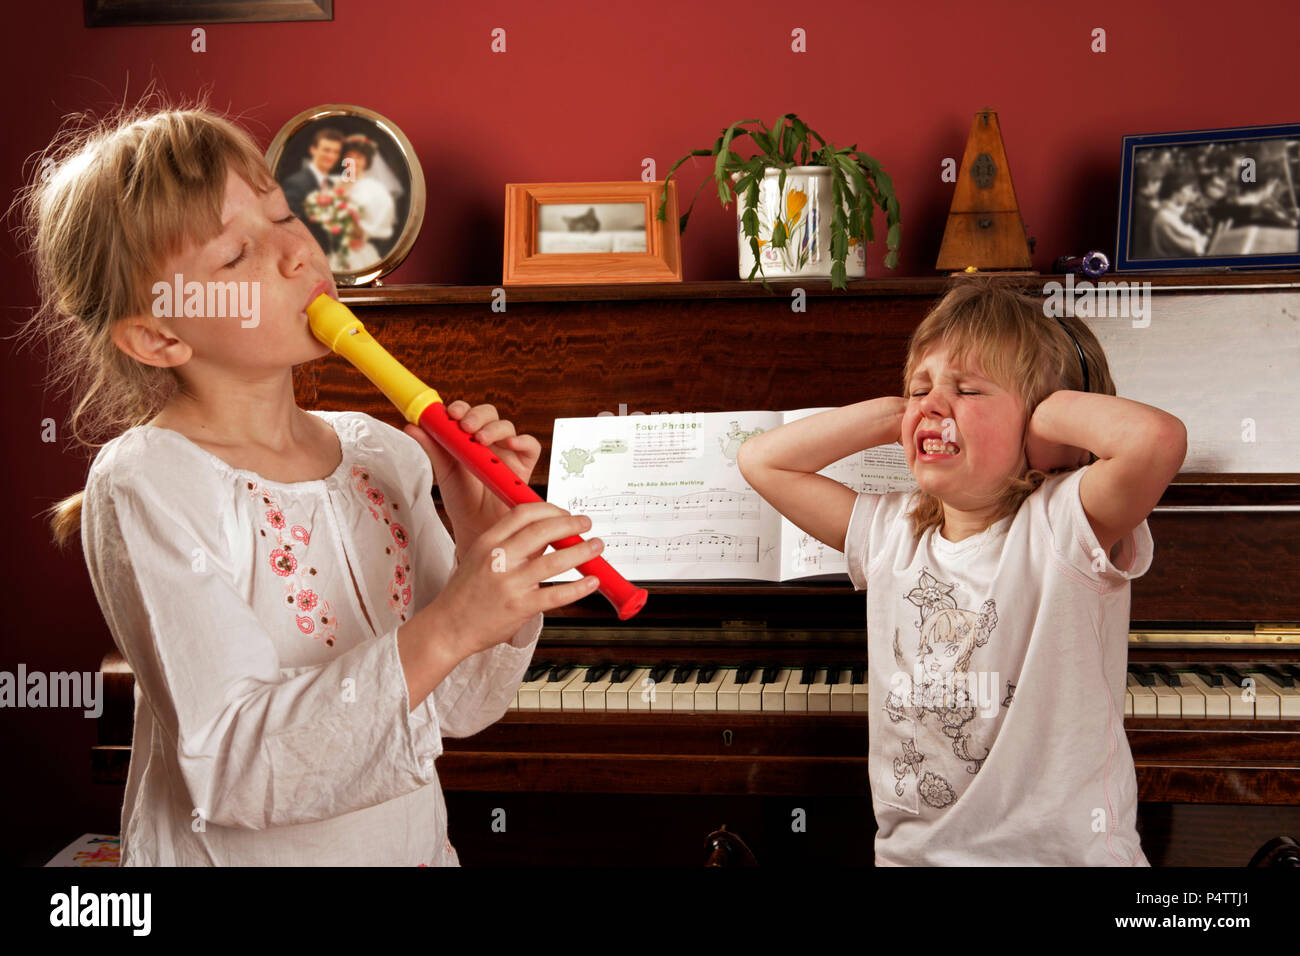 One girl playing the recorder and the other showing her appreciation Stock Photo